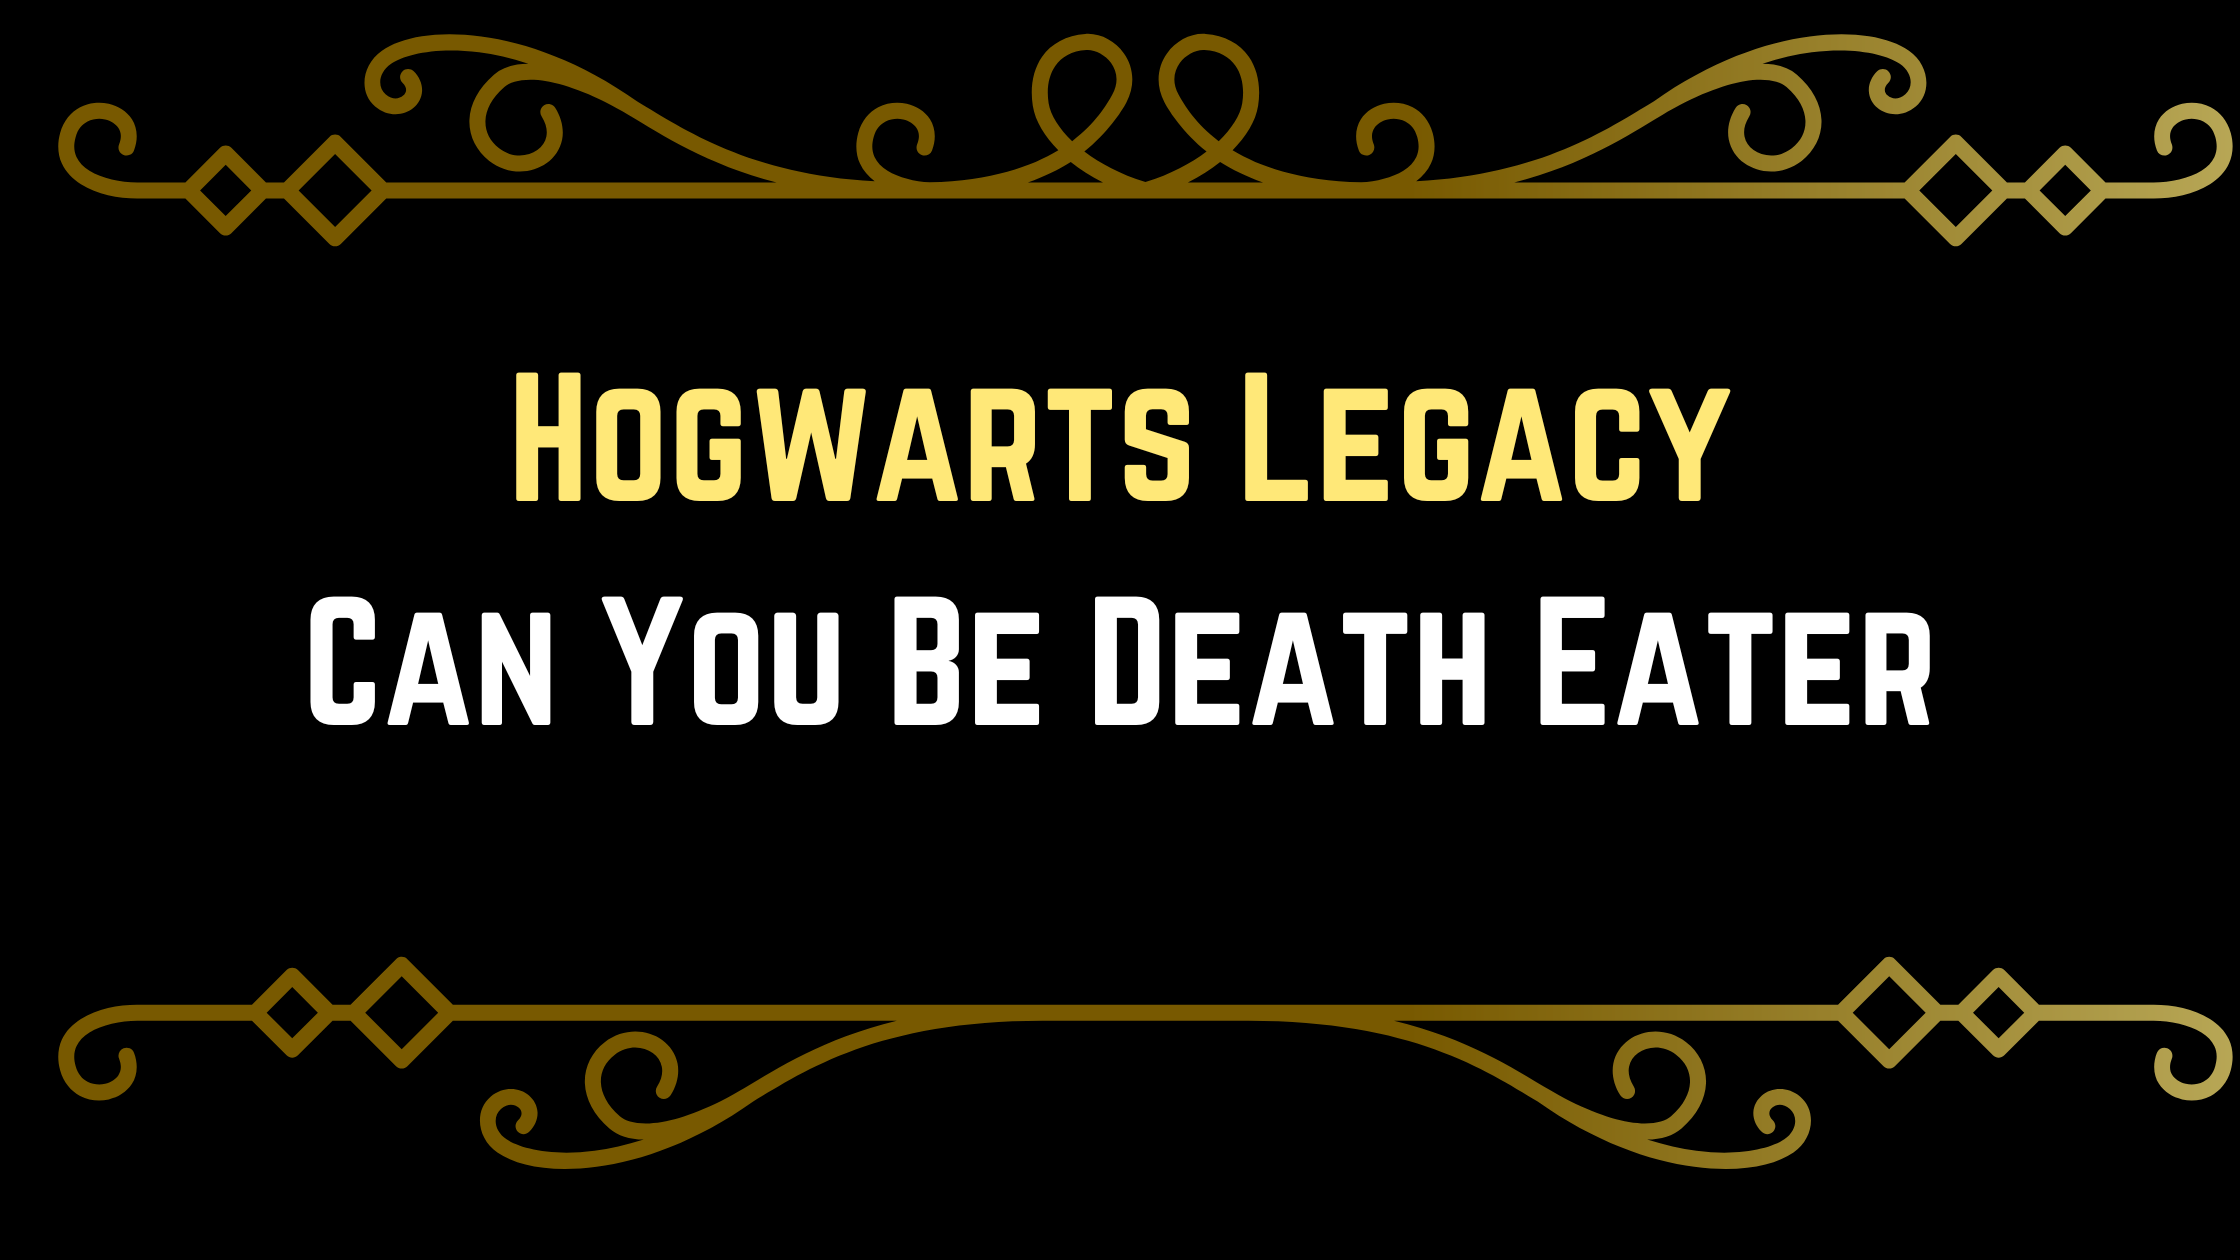 Can You Be Death Eater in Hogwarts Legacy